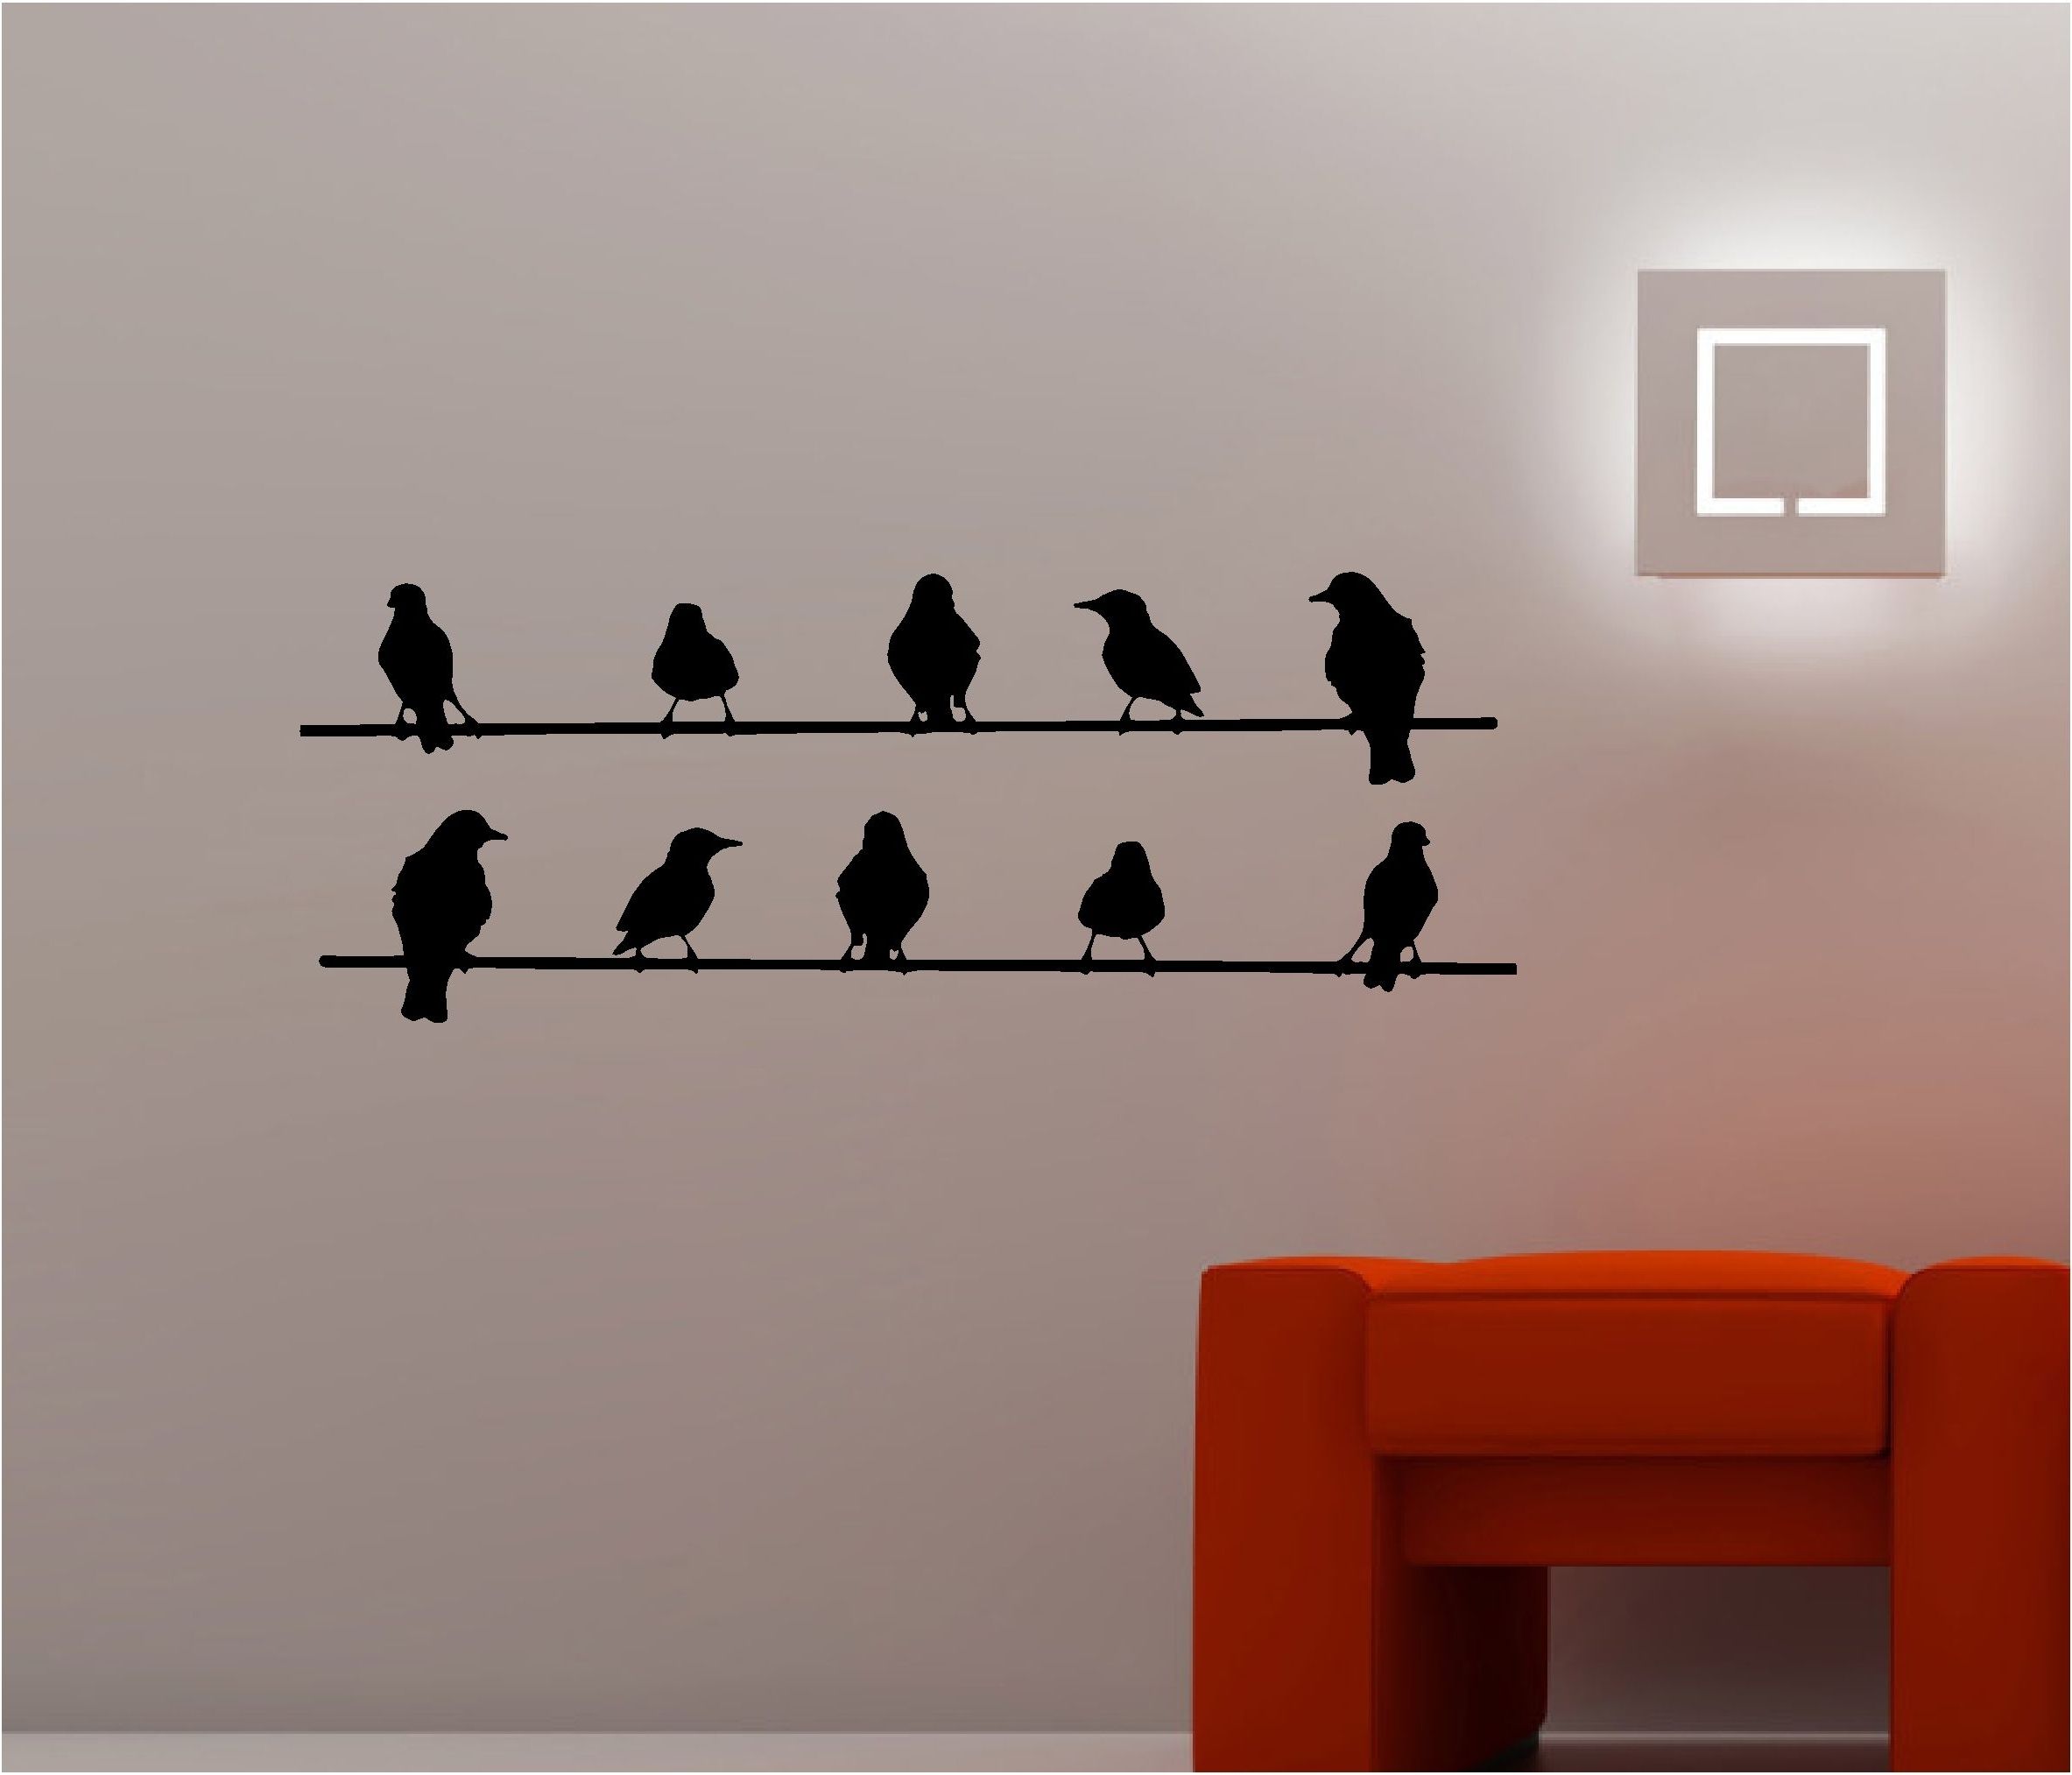 Favorite Birds On A Wire Wall Art With Depiction Of Birds On Wire Wall Art Optimize Every Inch Of Interior (View 4 of 15)